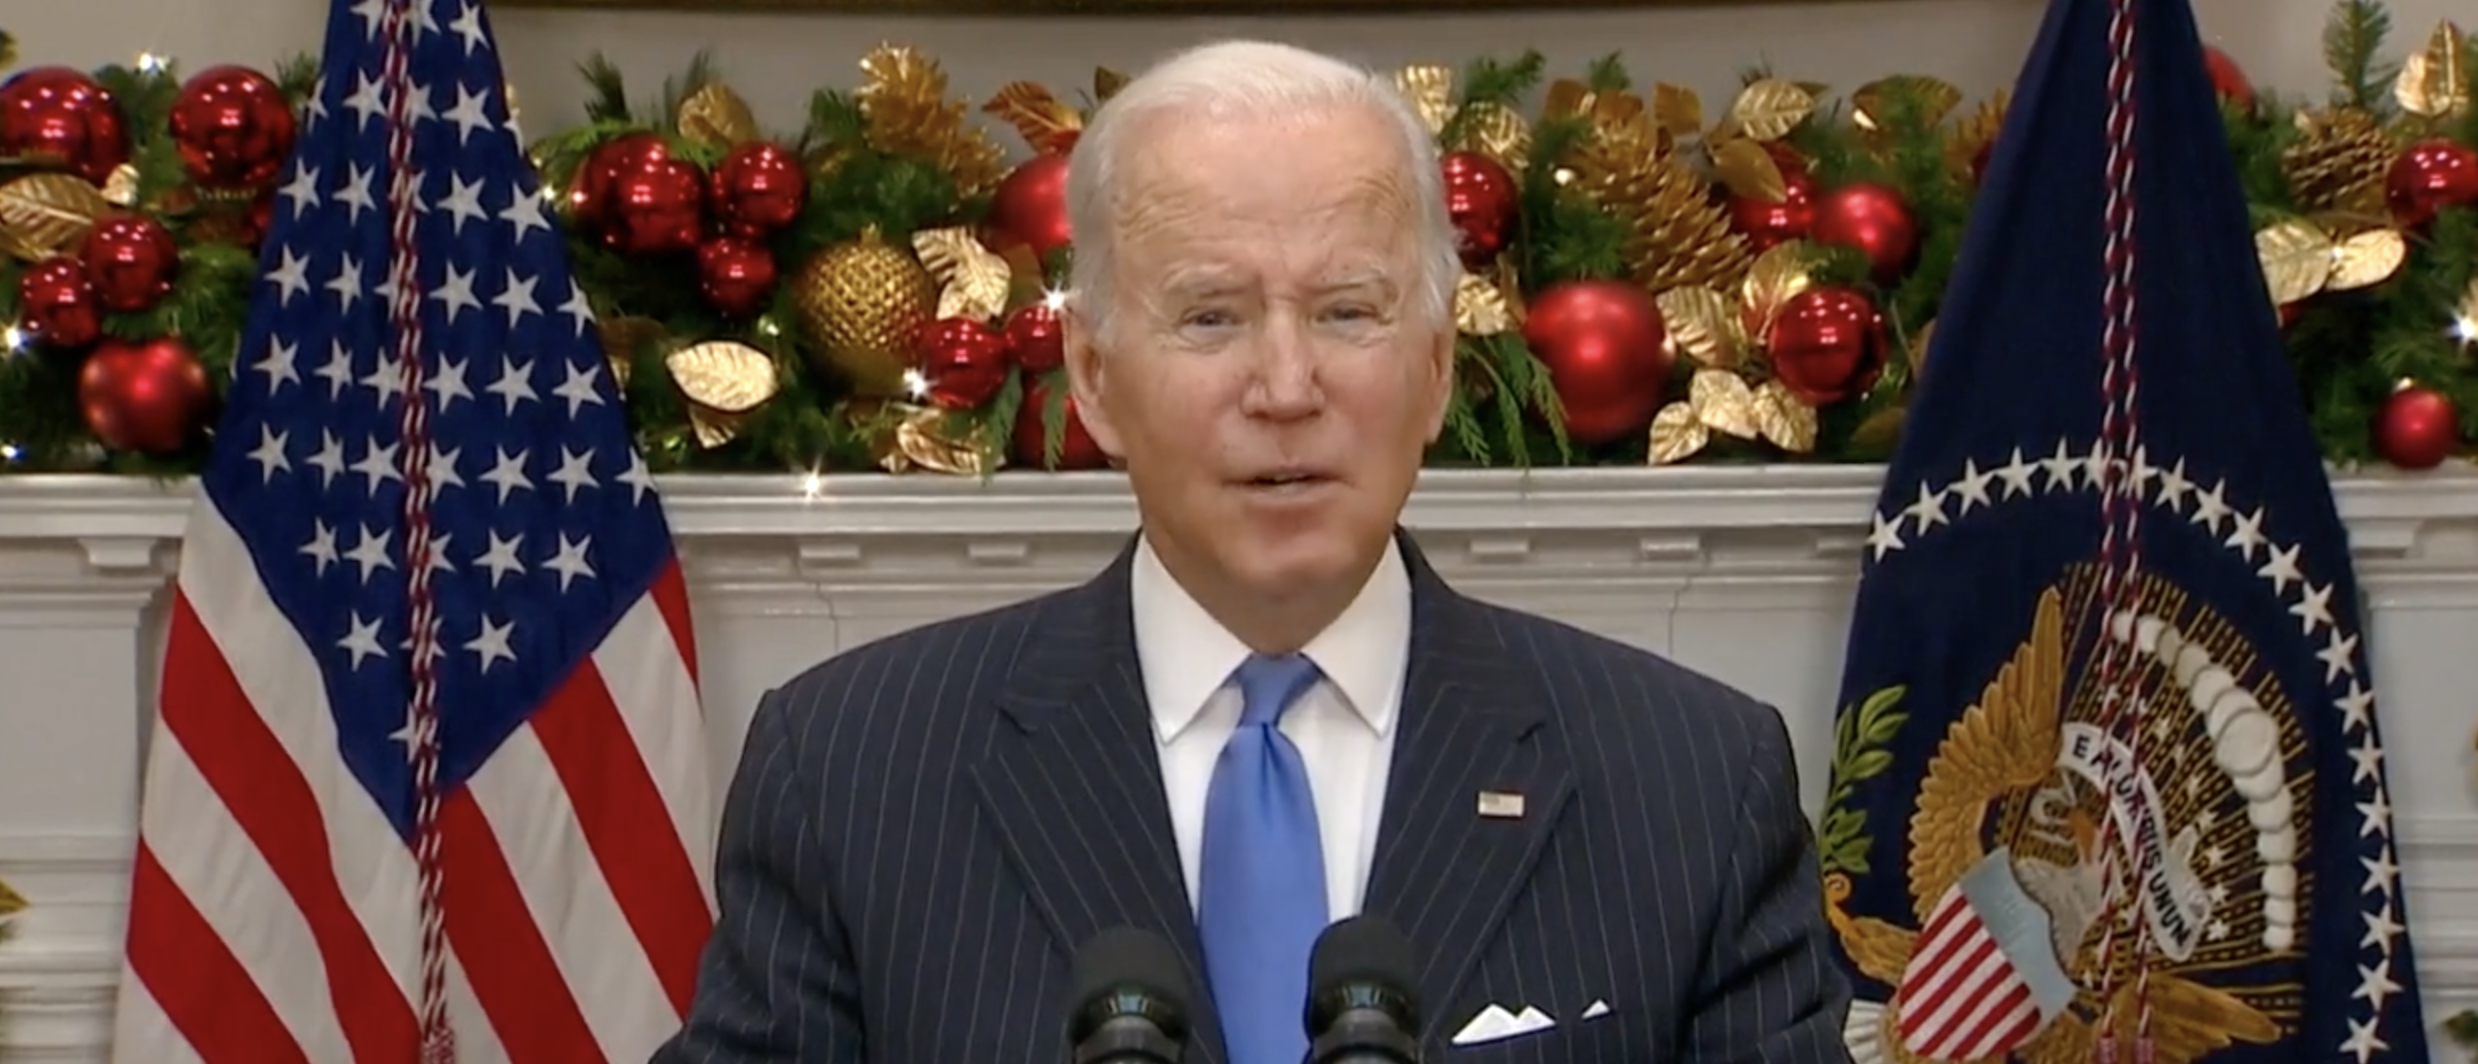 Biden Says Omicron Variant Is ‘Cause For Concern, Not Cause For Panic,’ Defends Implementation Of Travel Restrictions